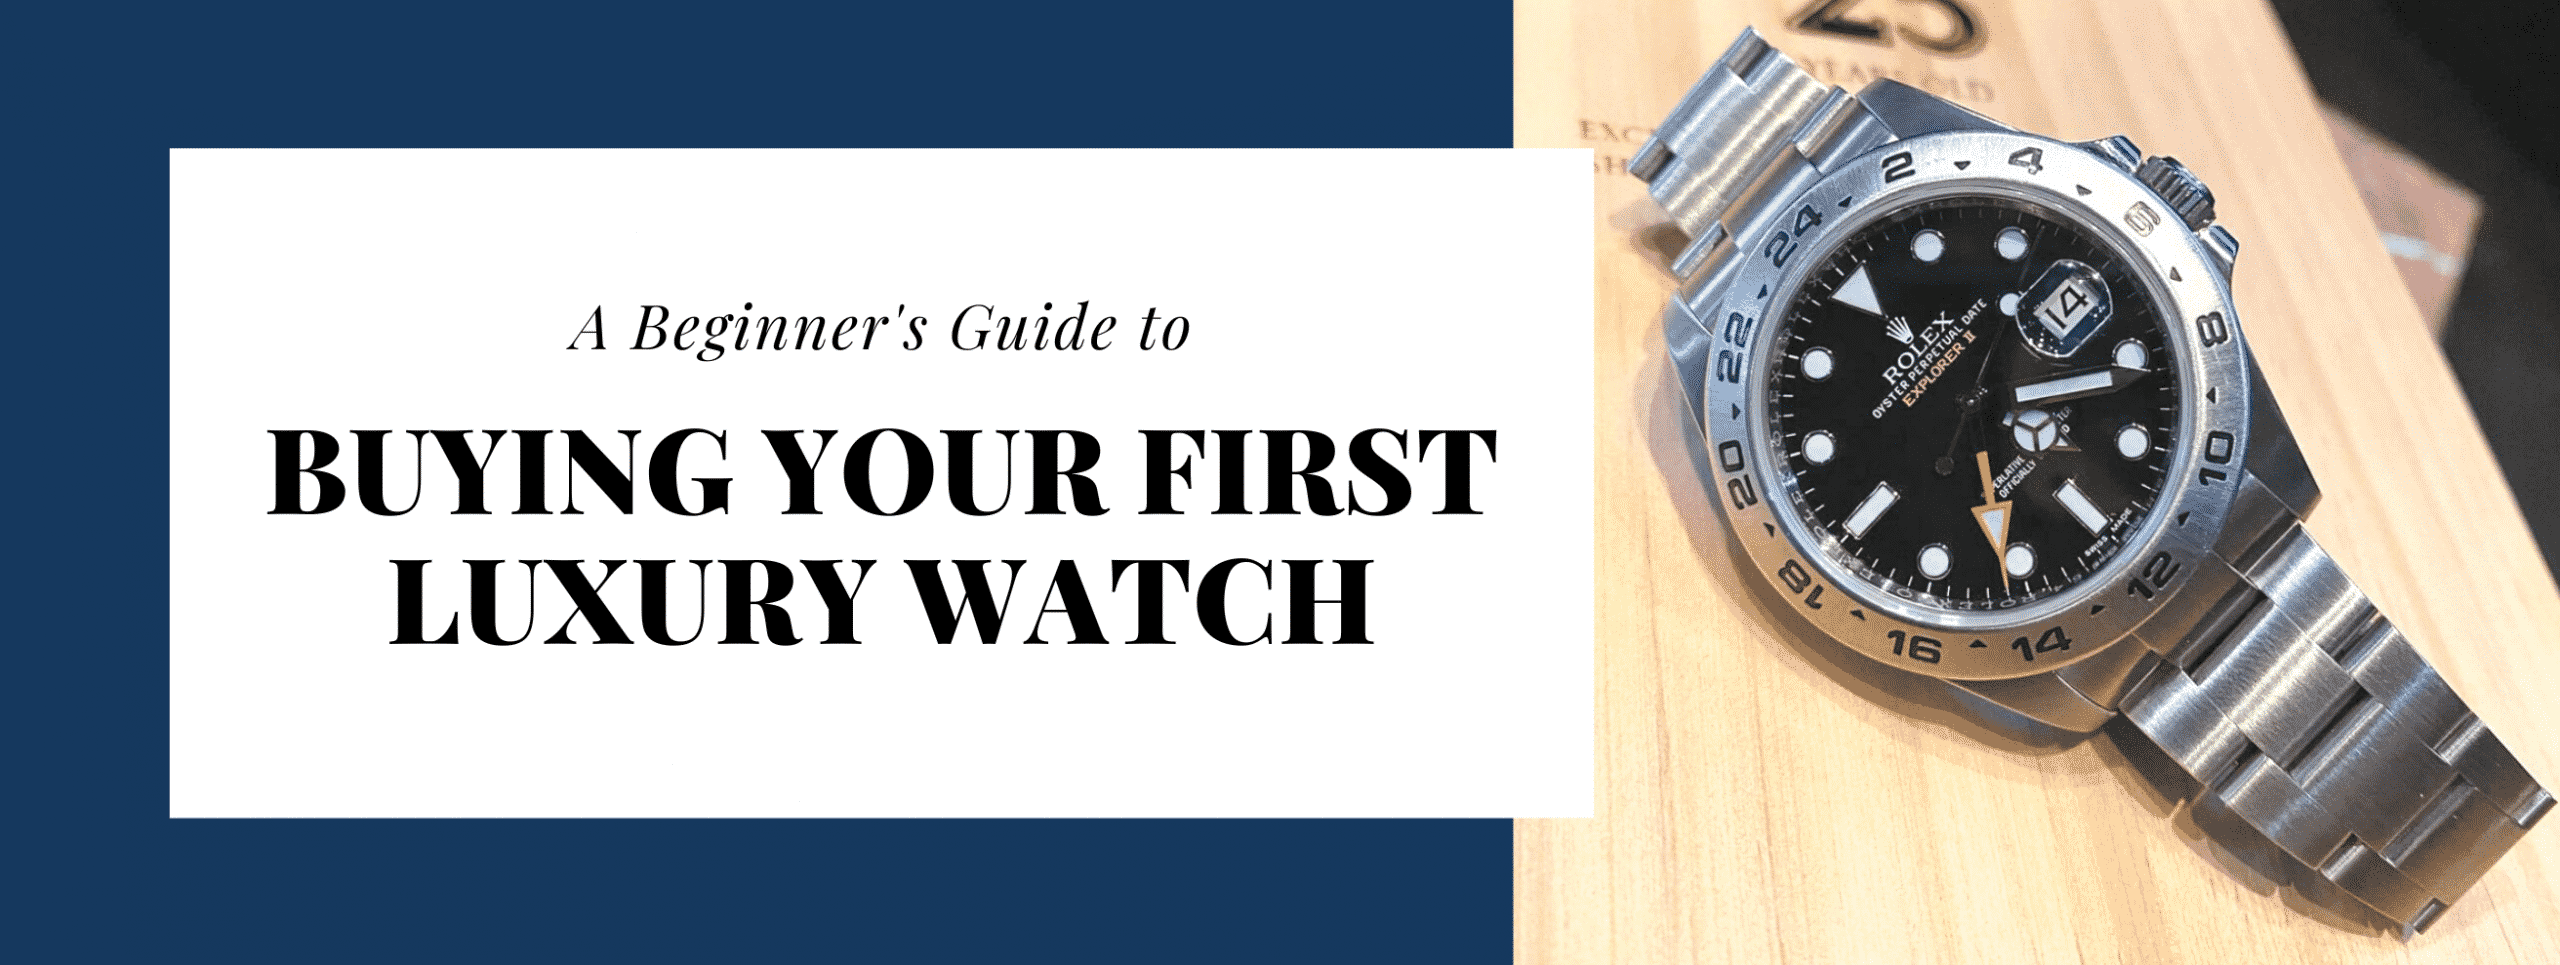 Guide to Buying First Luxury Watch